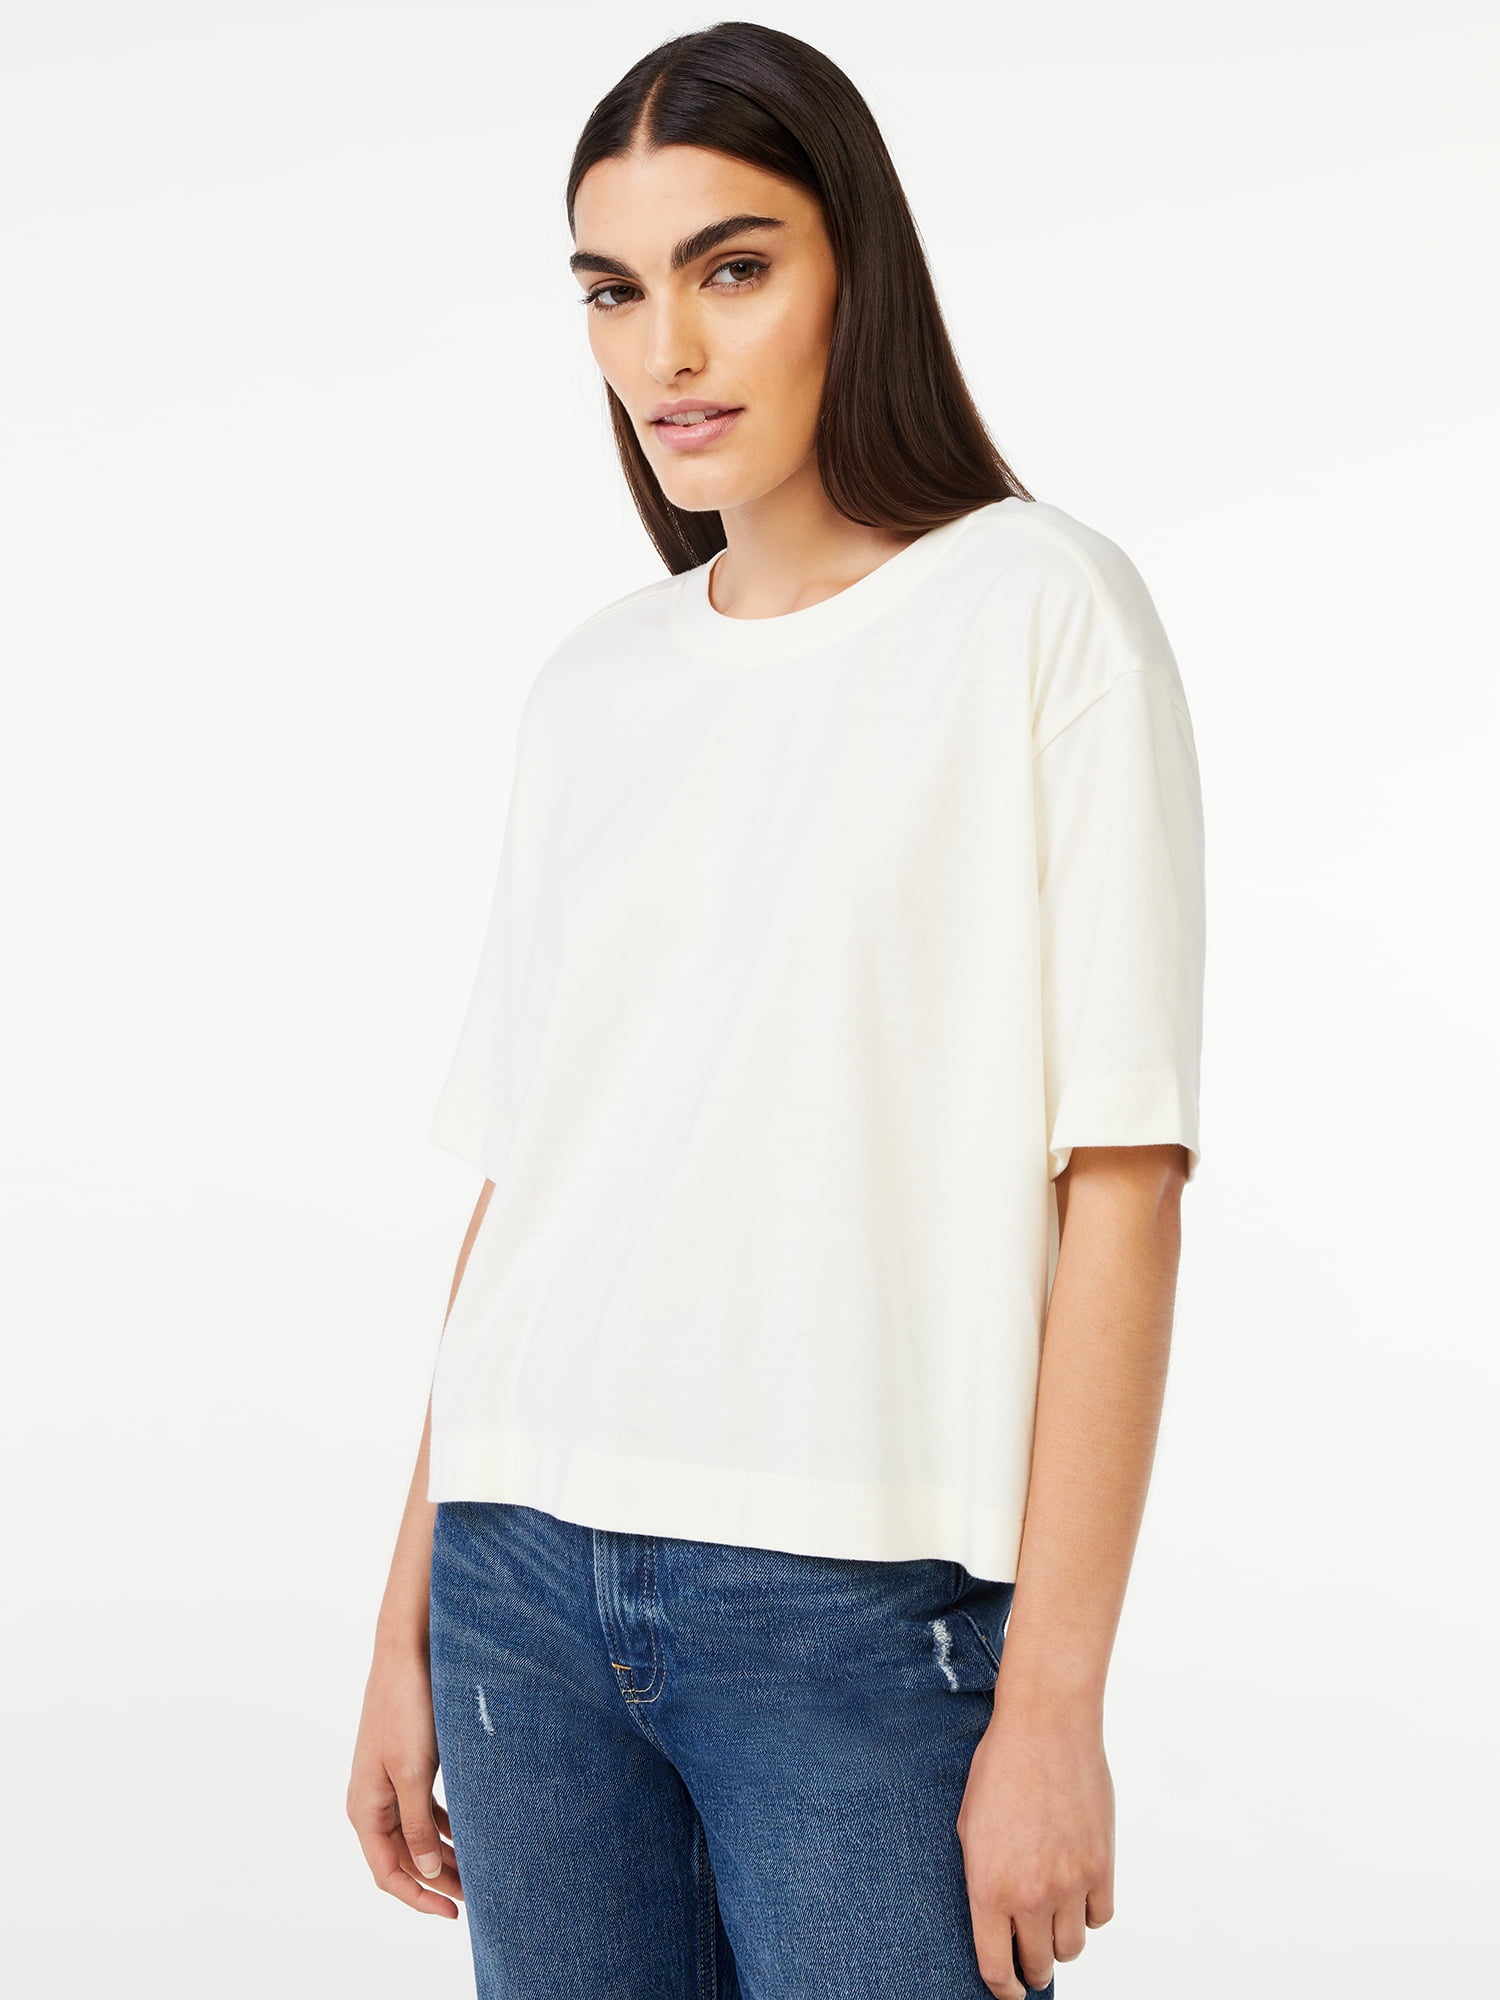 Free Assembly Women’s Square T-Shirt with Short Sleeves